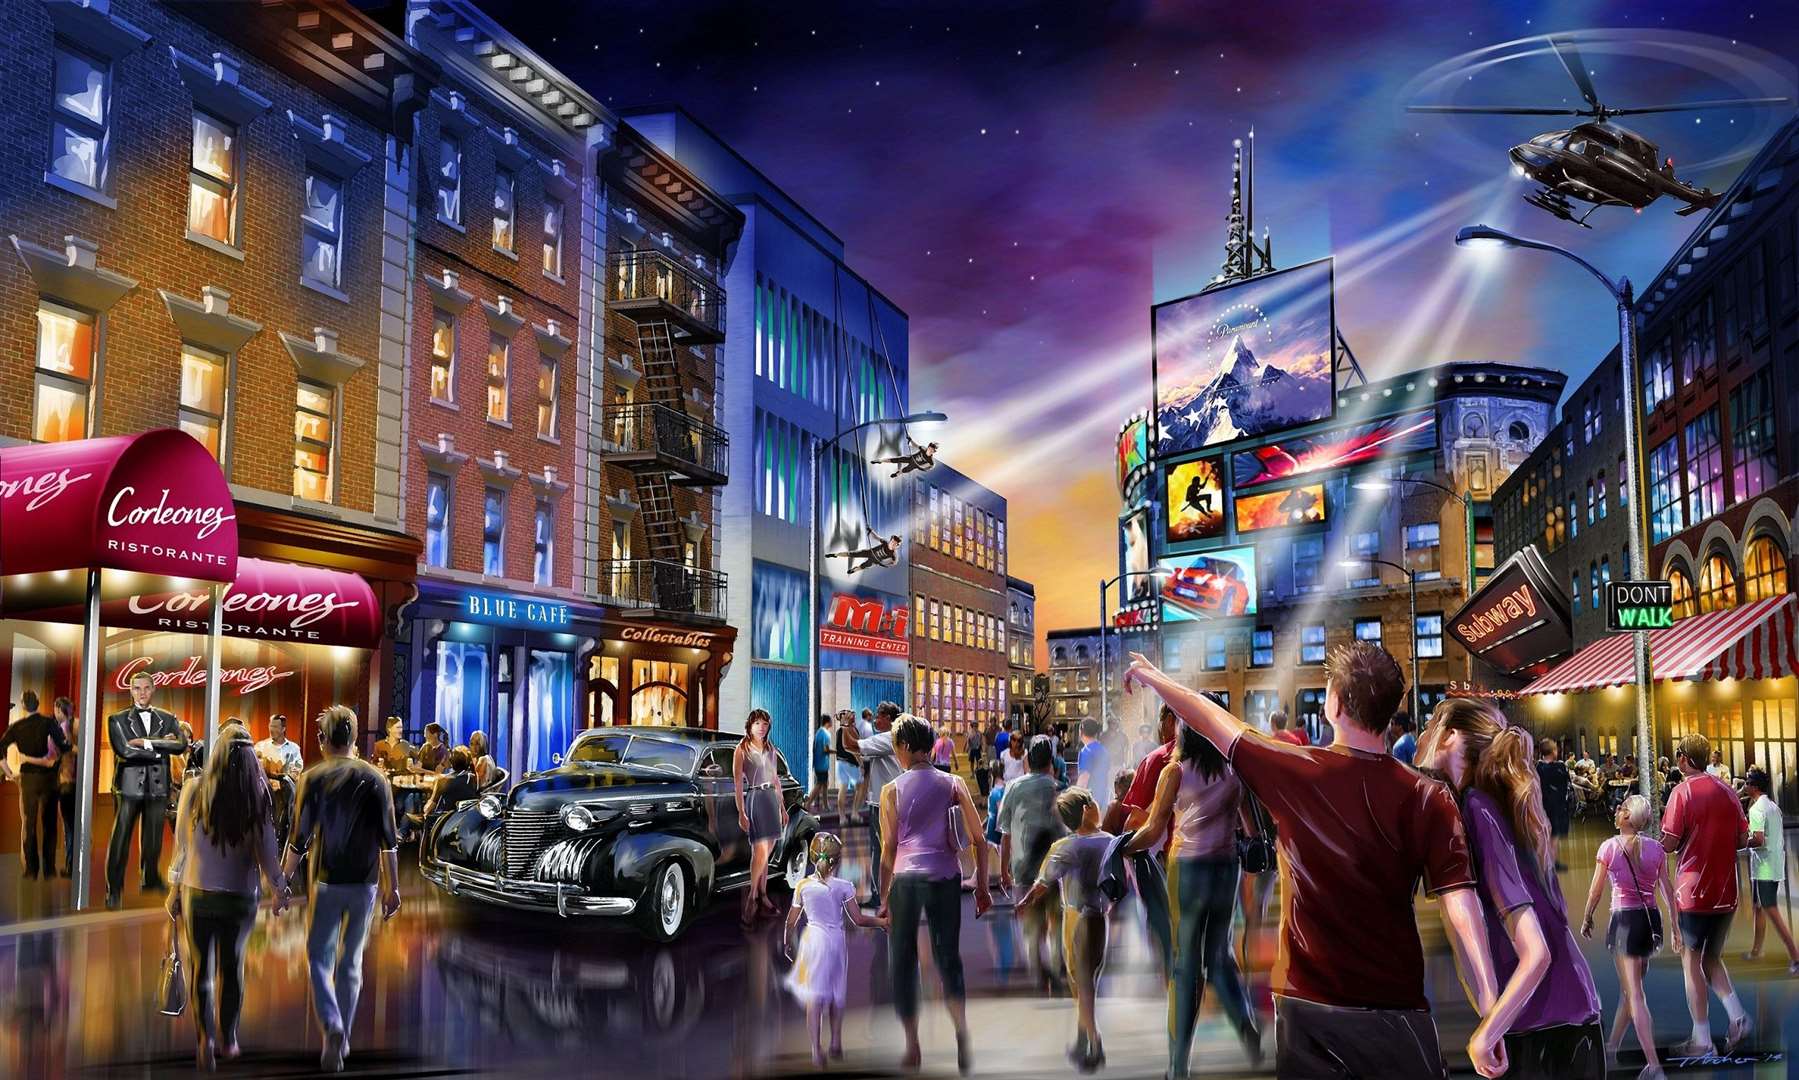 The £5 billion entertainment complex struck a deal with Hollywood film studio Paramount earlier this year.